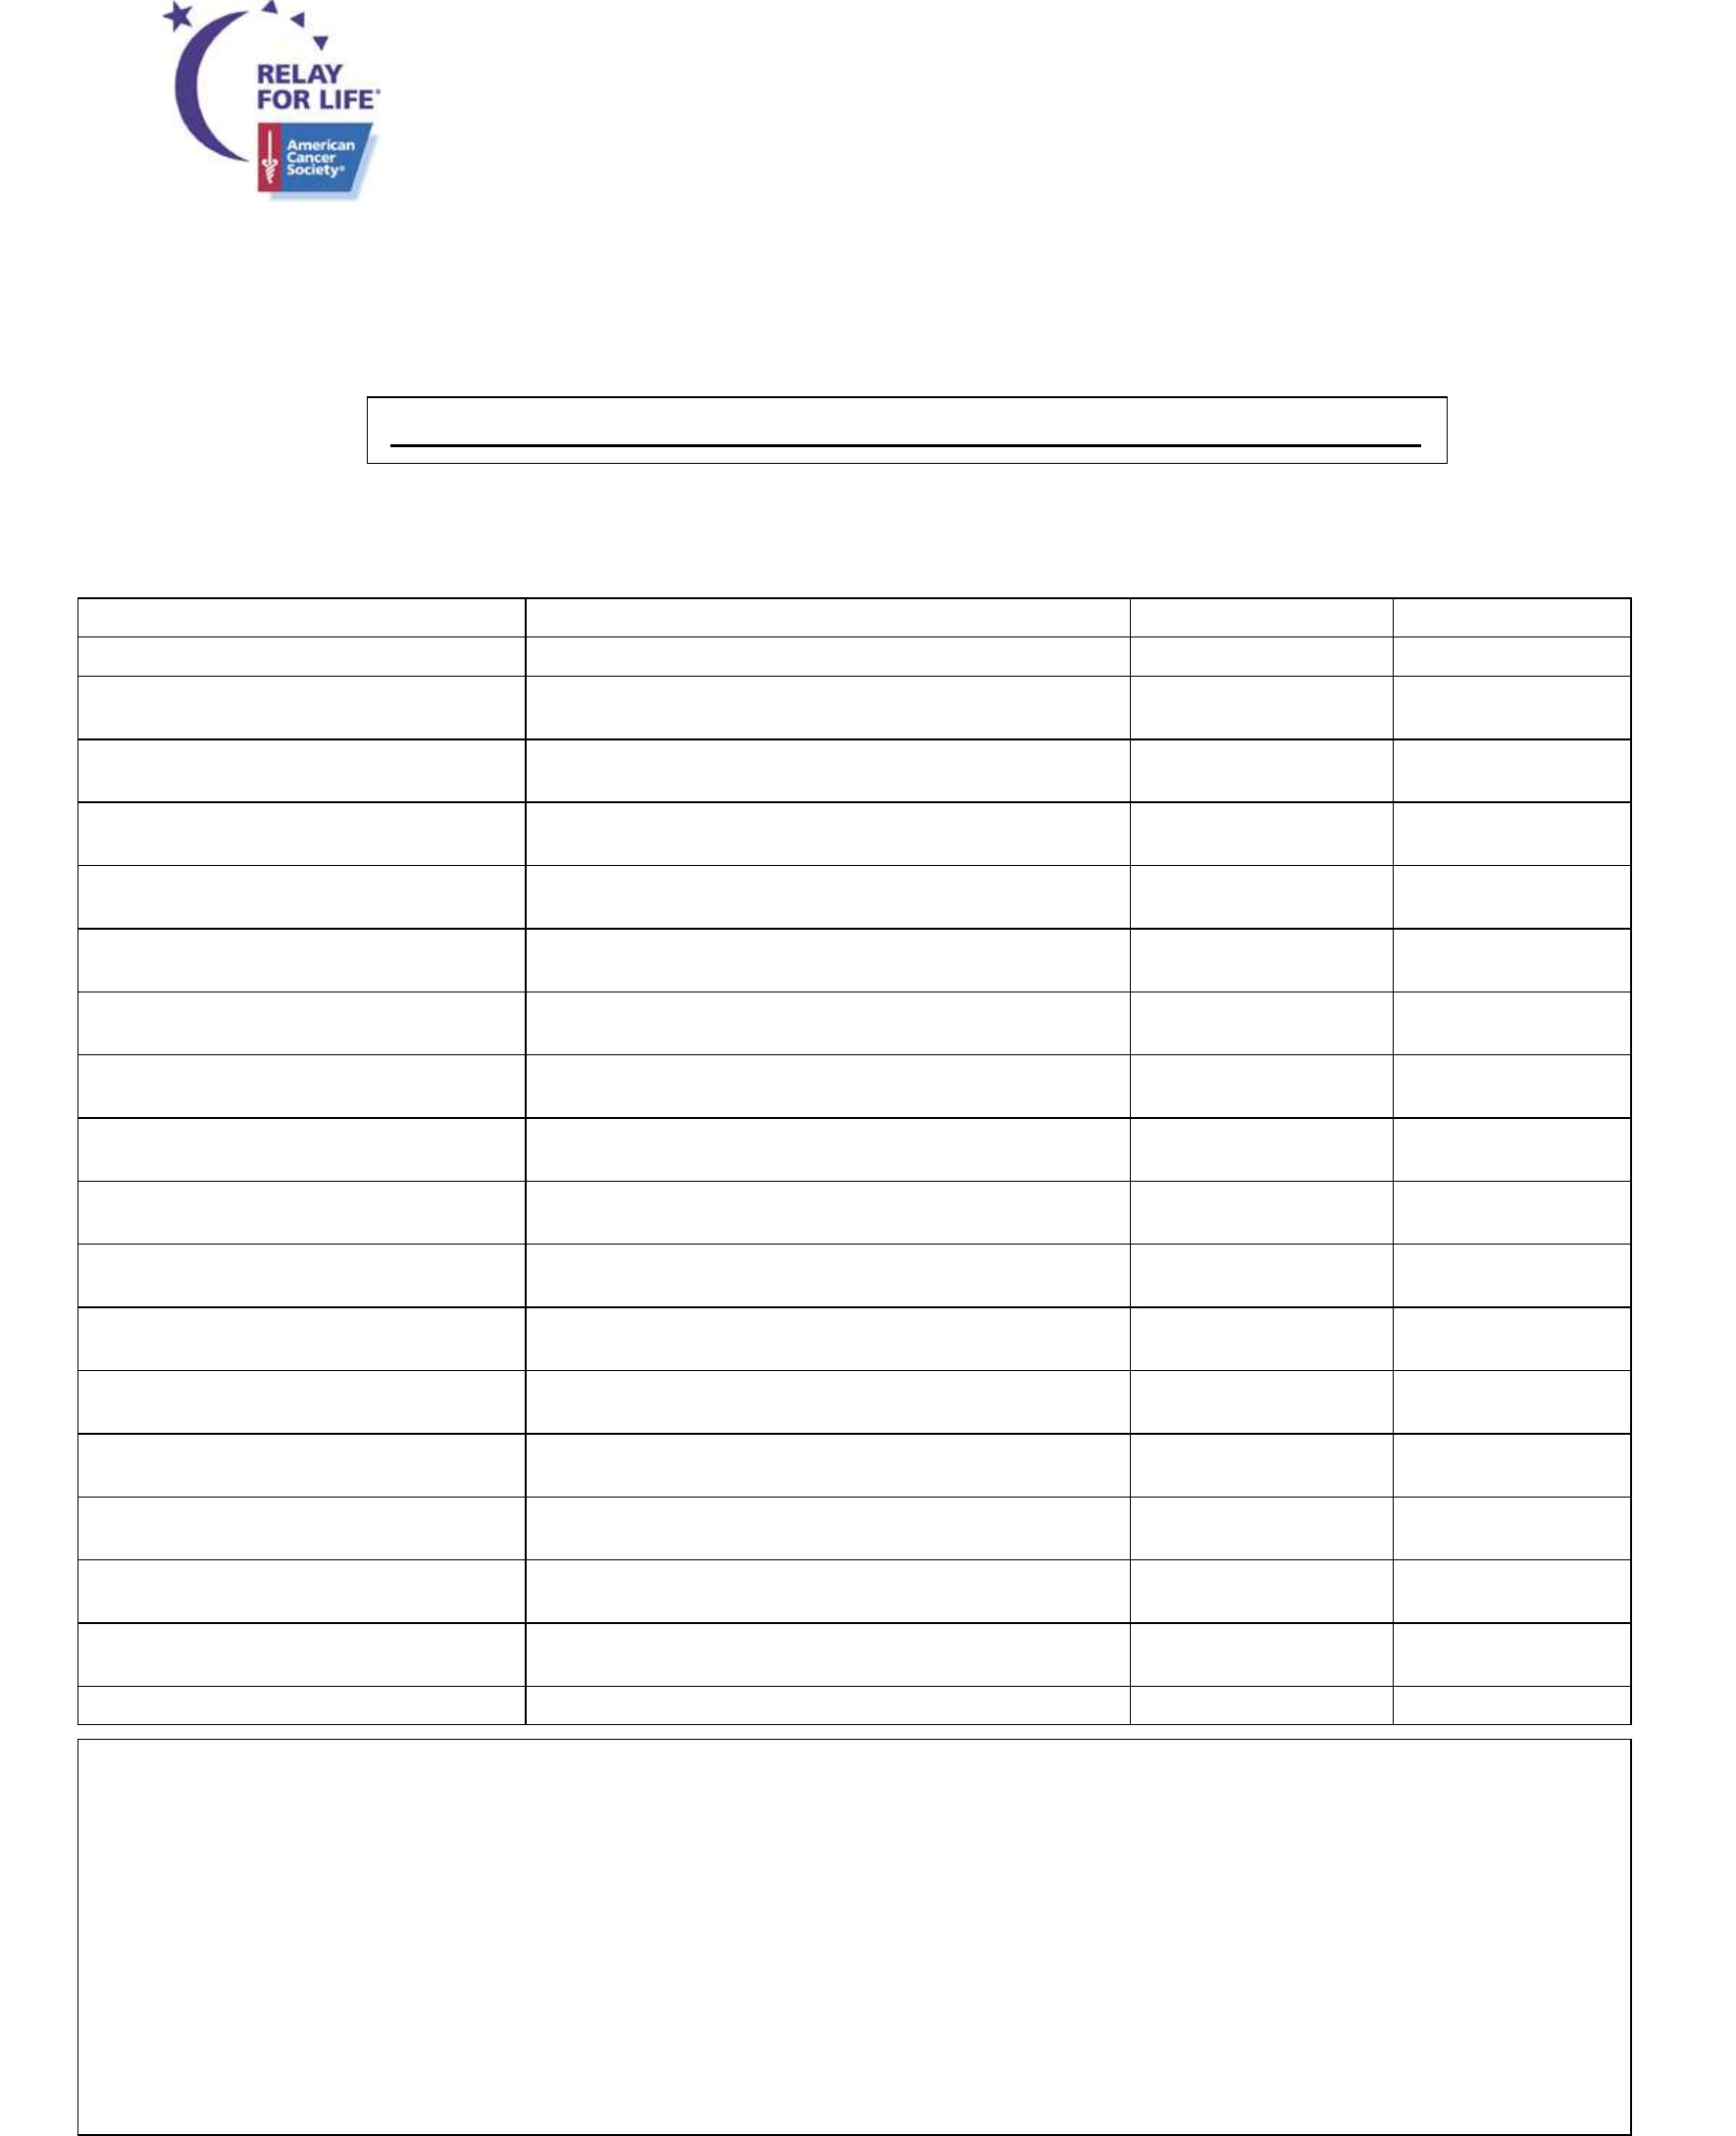 Relay For Life Donation Form – America Free Download Pertaining To Blank Sponsor Form Template Free